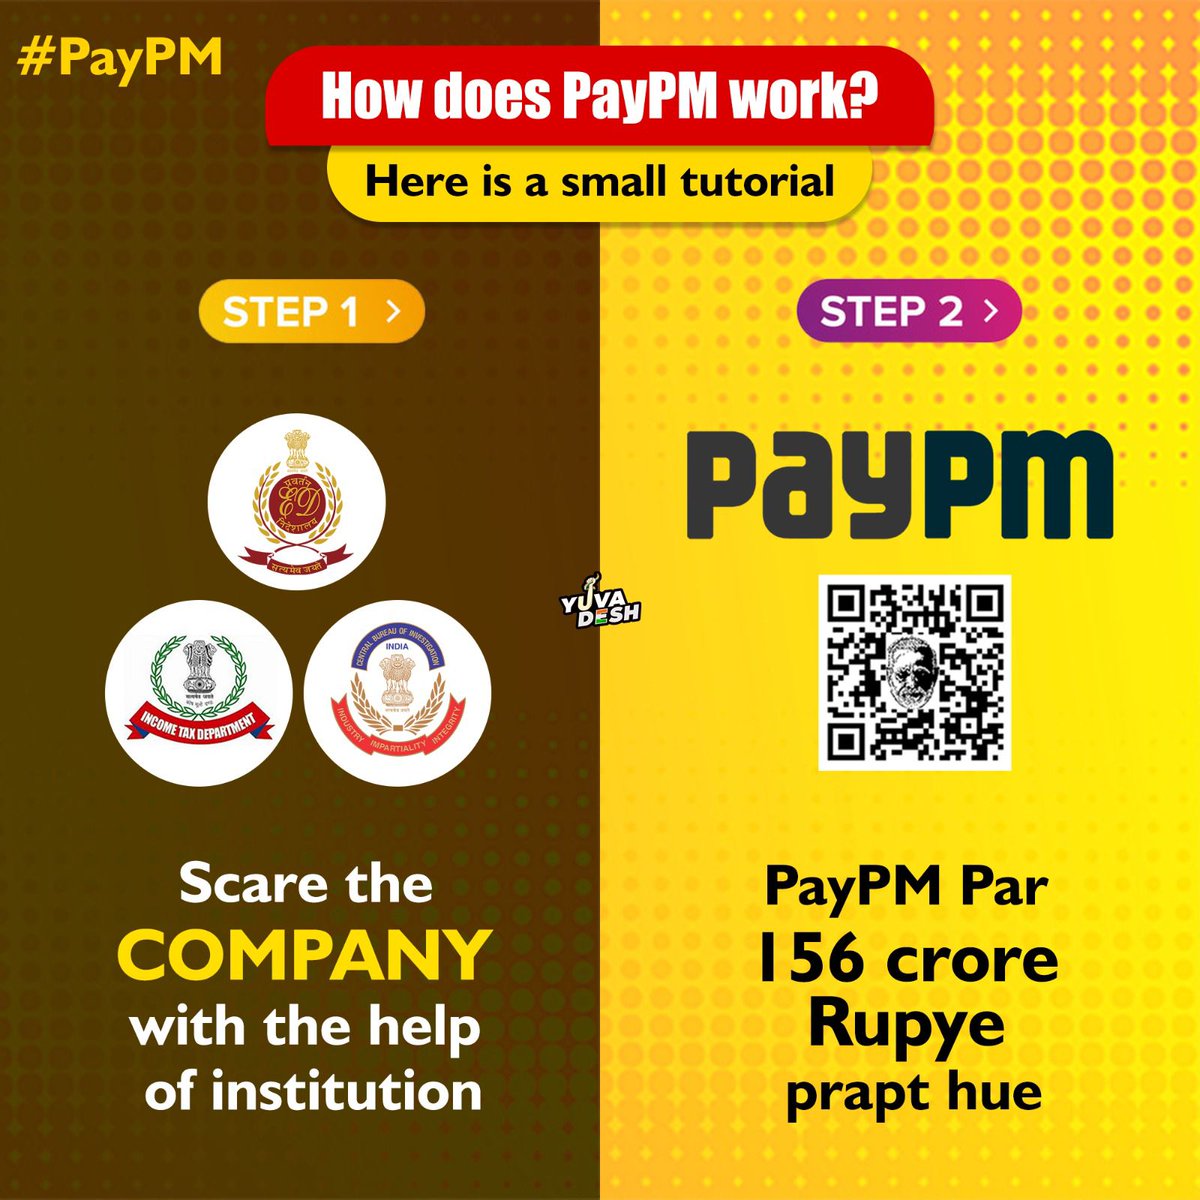 How does PayPM work?

#PayPM